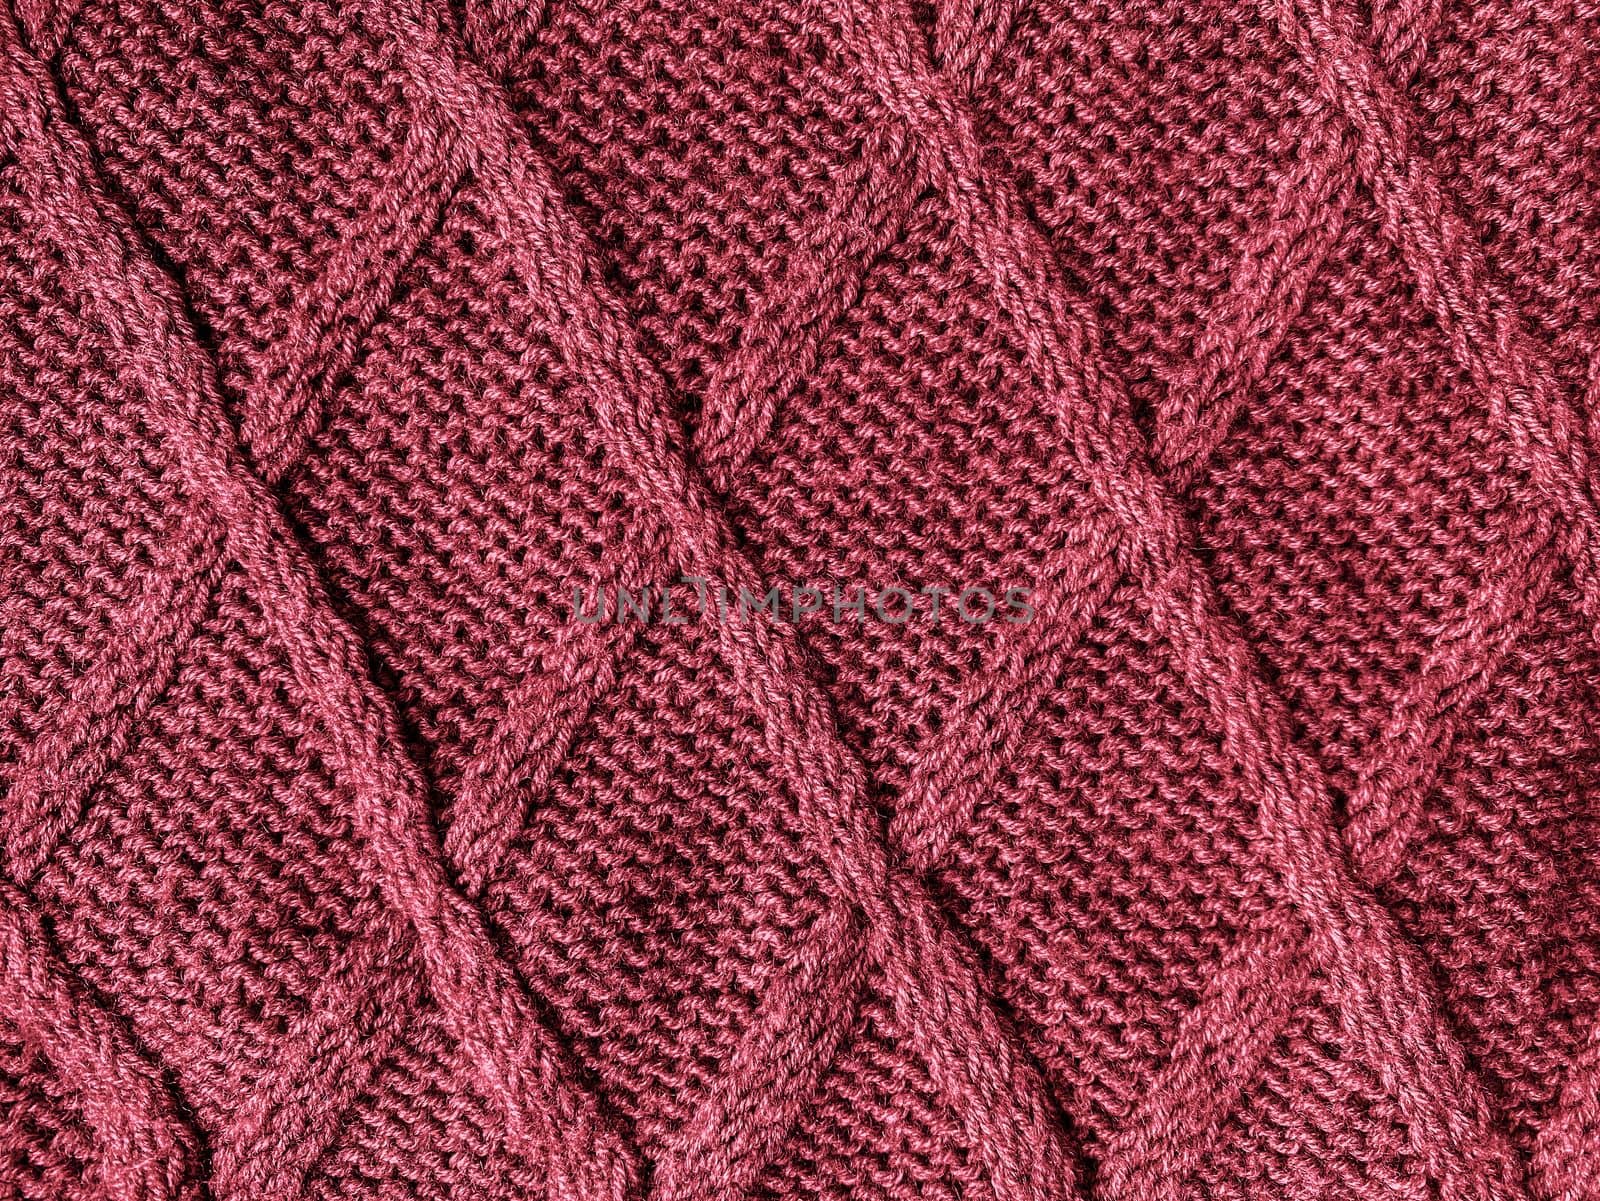 Detail Knitted Fabric. Vintage Woven Textile. Linen Jacquard Holiday Background. Knitted Wool. Red Soft Thread. Scandinavian Winter Plaid. Fiber Print Garment. Closeup Abstract Wool.